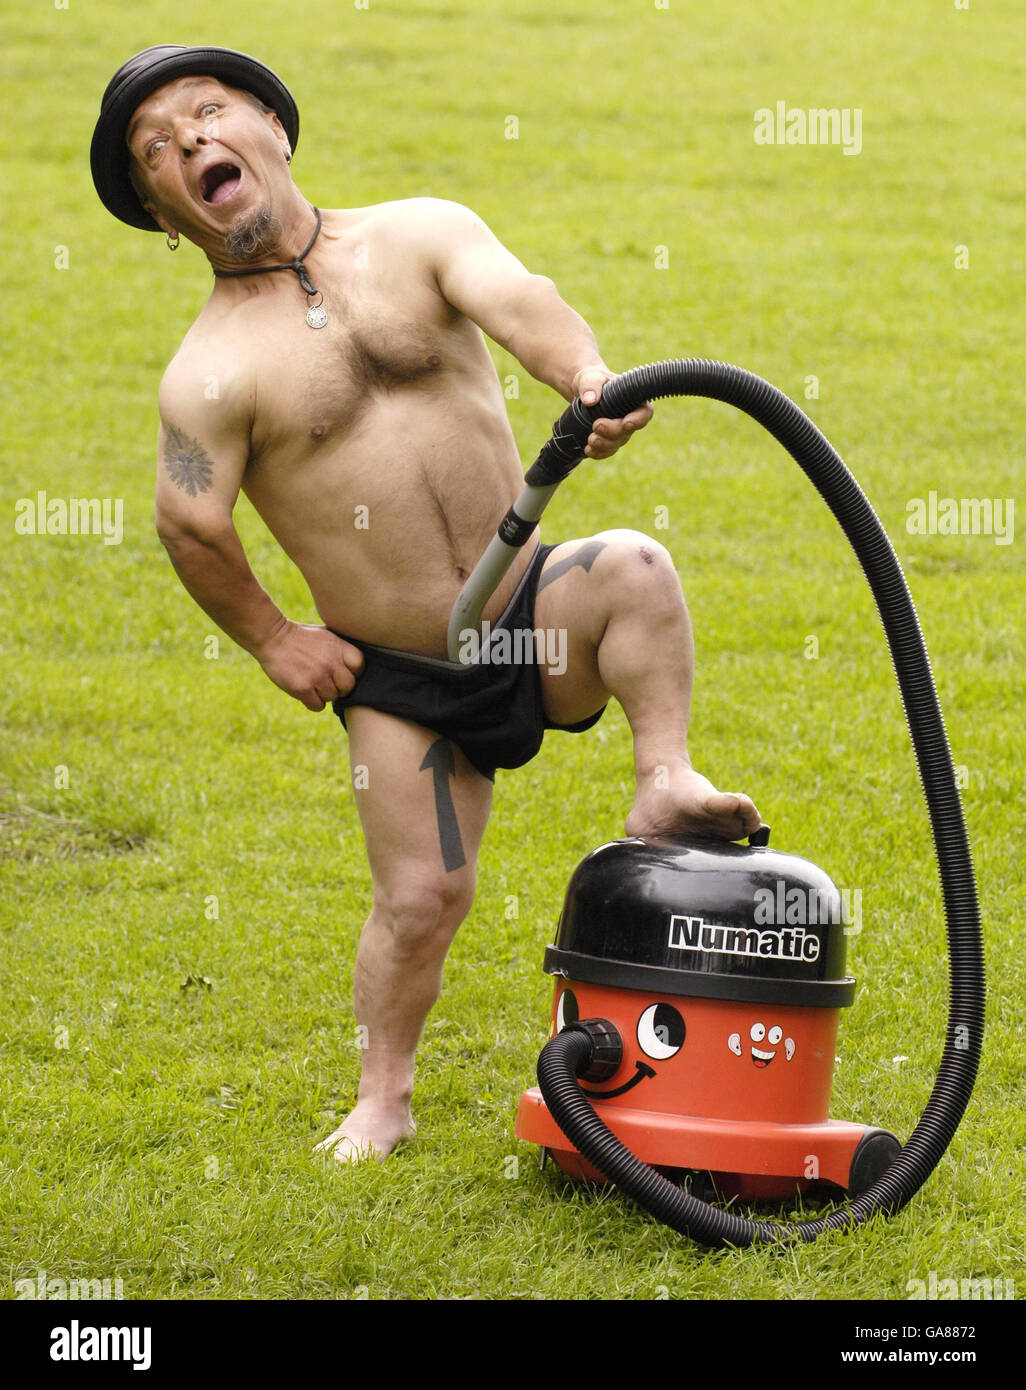 Performer's sticky situation with vacuum cleaner Stock Photo